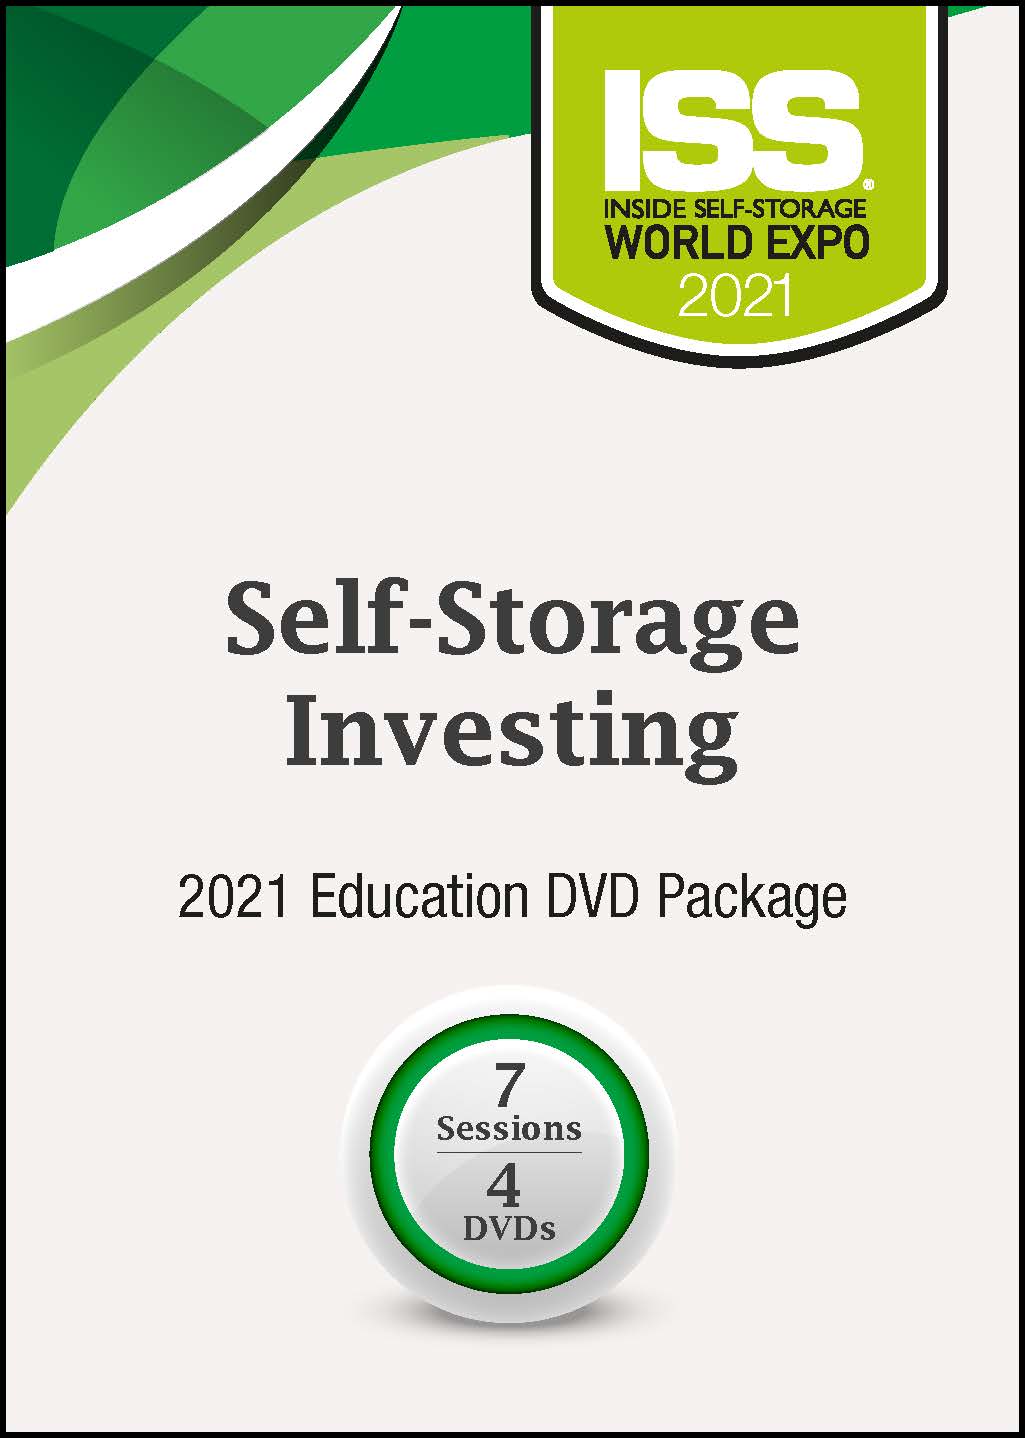 DVD - Self-Storage Investing 2021 Education DVD Package